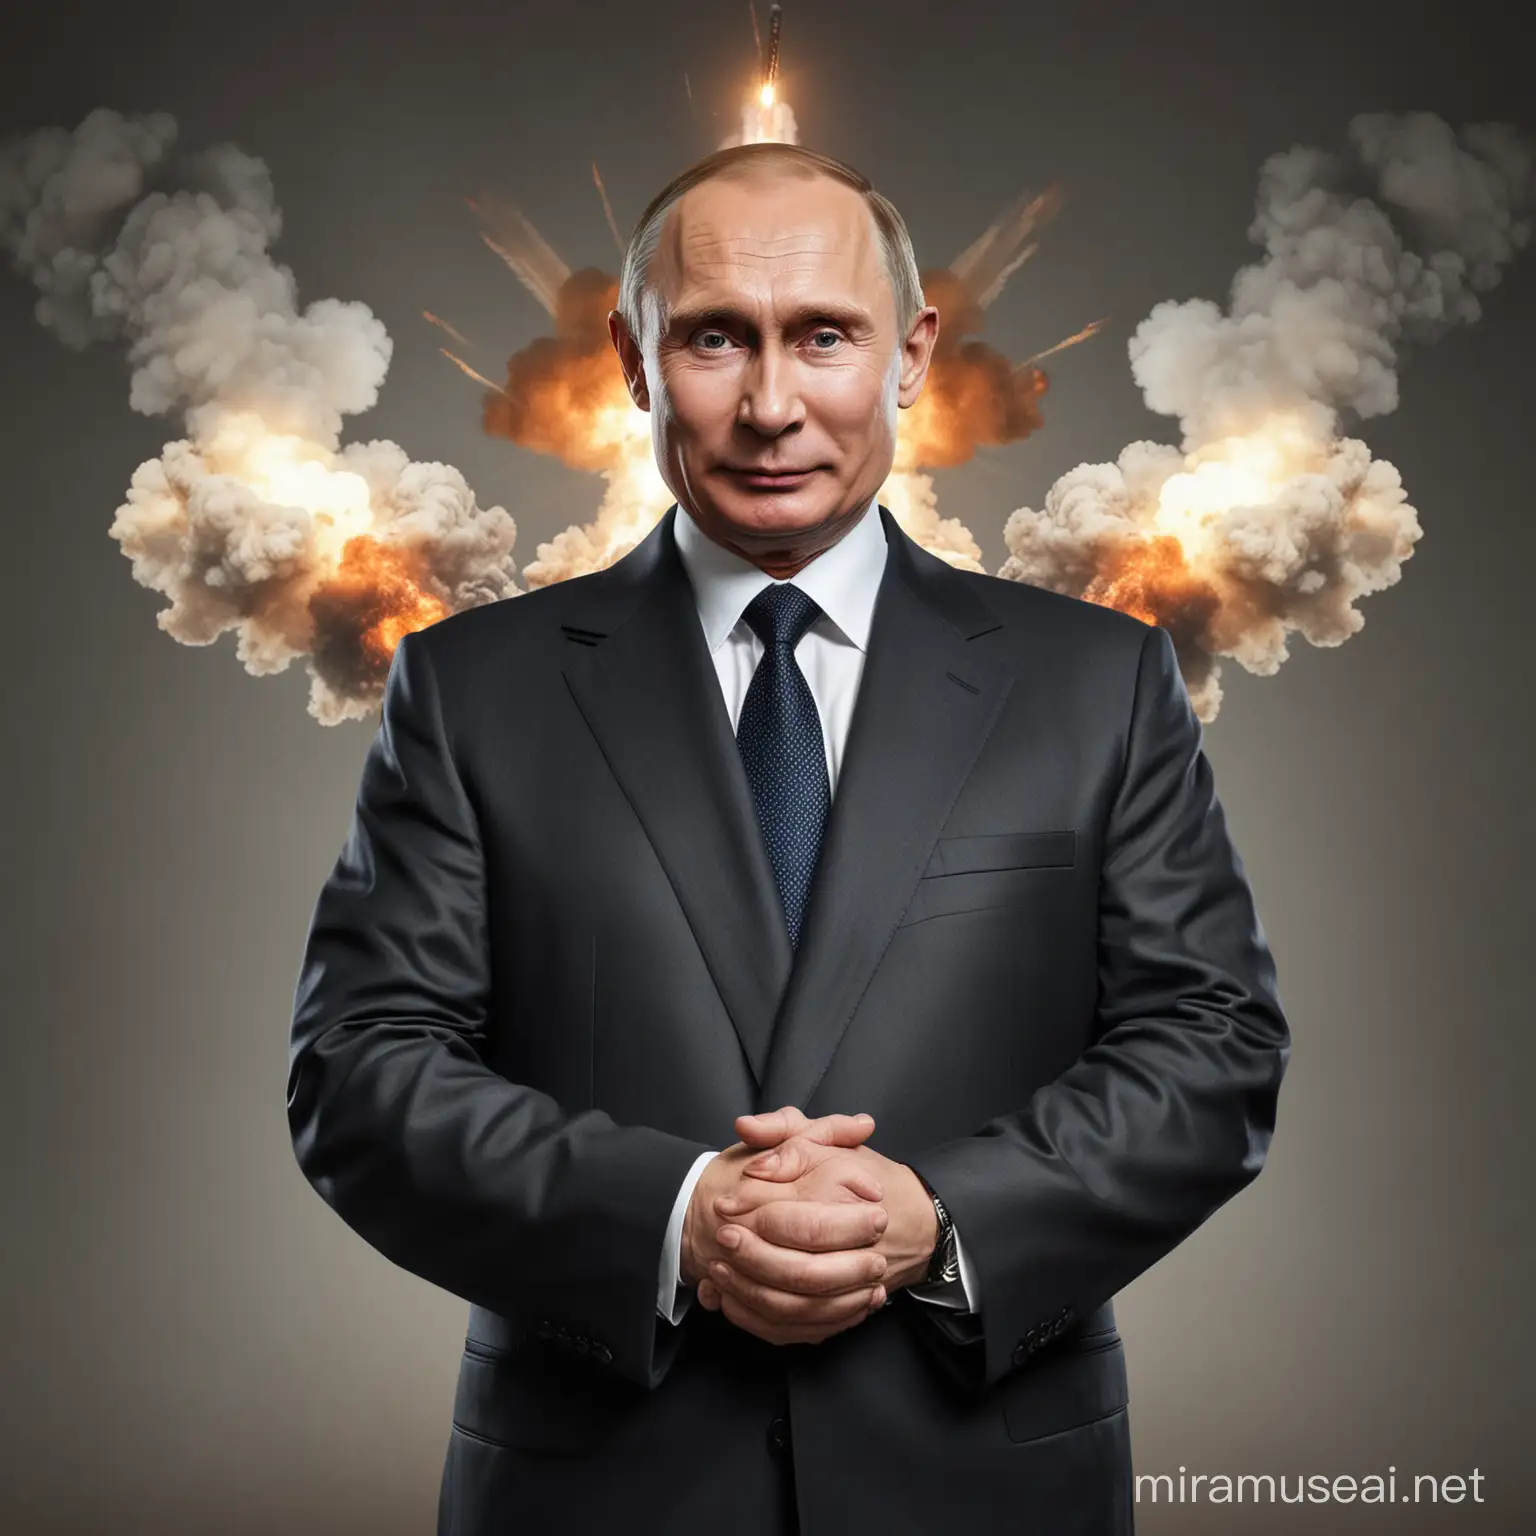 Cheerful Putin and Russian Patriotic Symbolism with Nuclear Arsenal